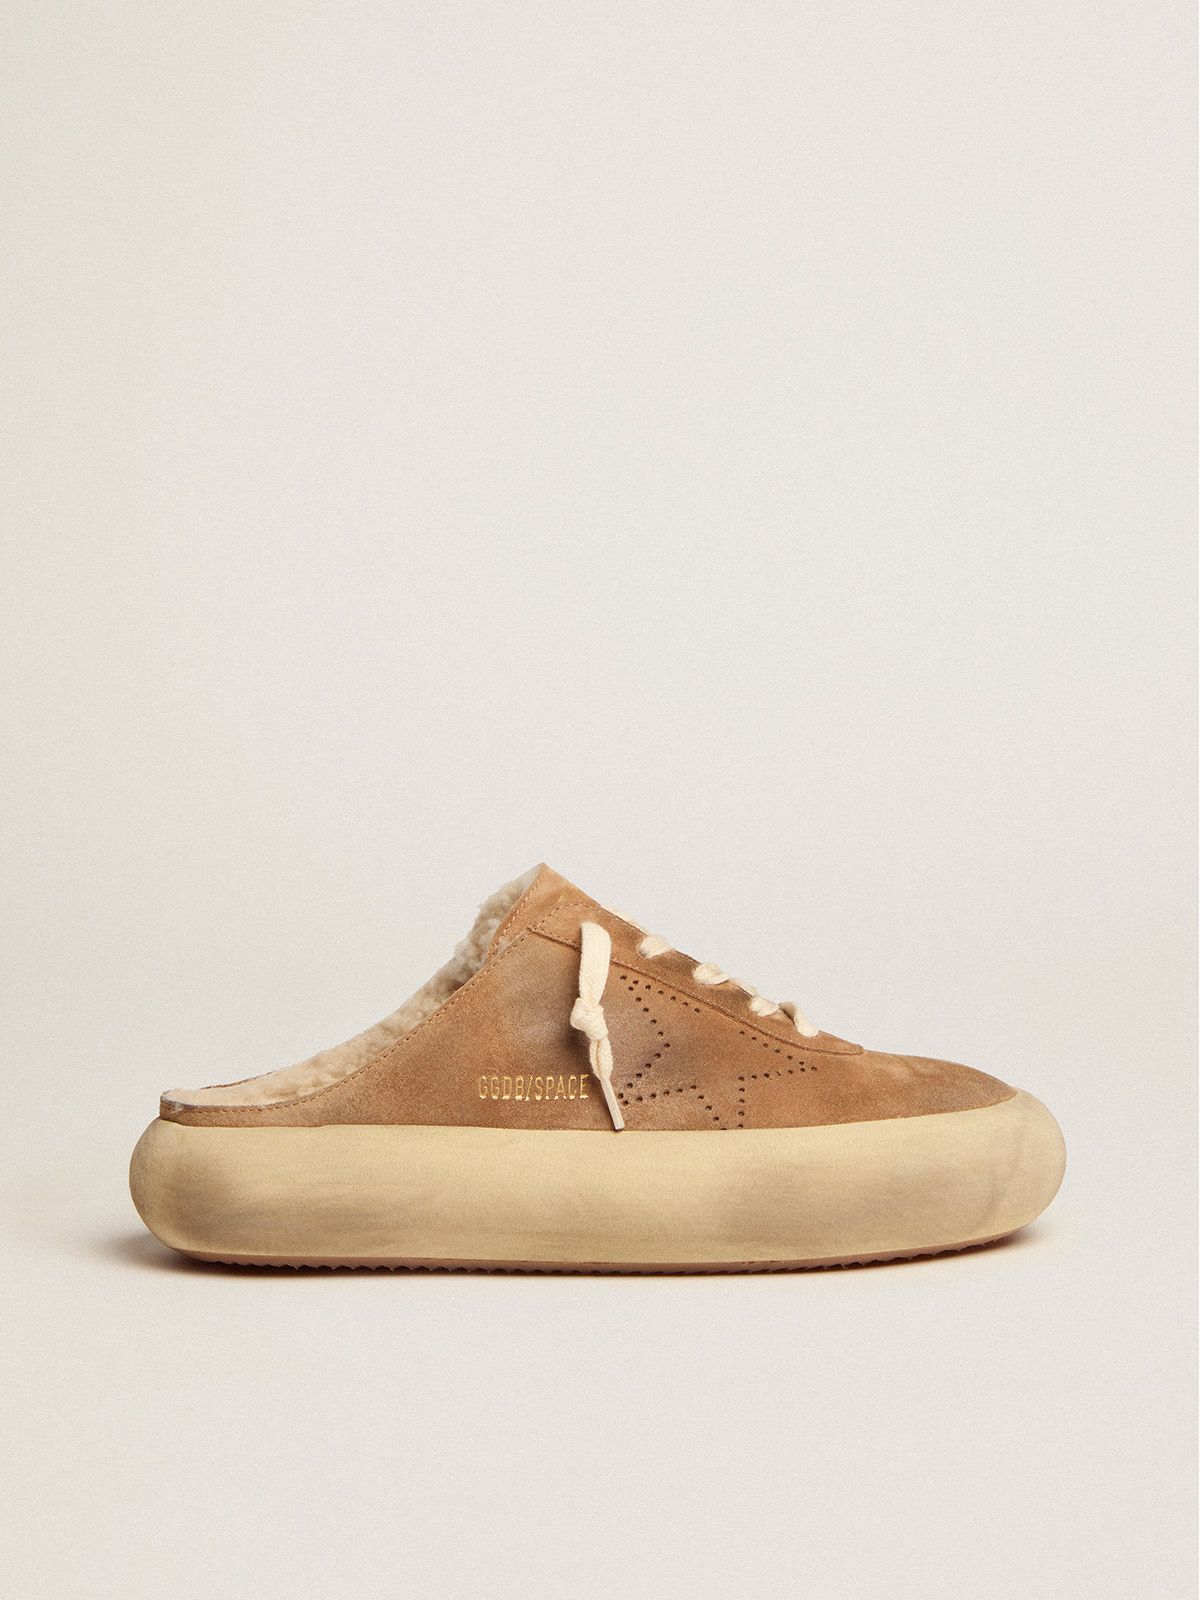 golden goose shoes in lining with shearling Sabot Space-Star suede tobacco-colored